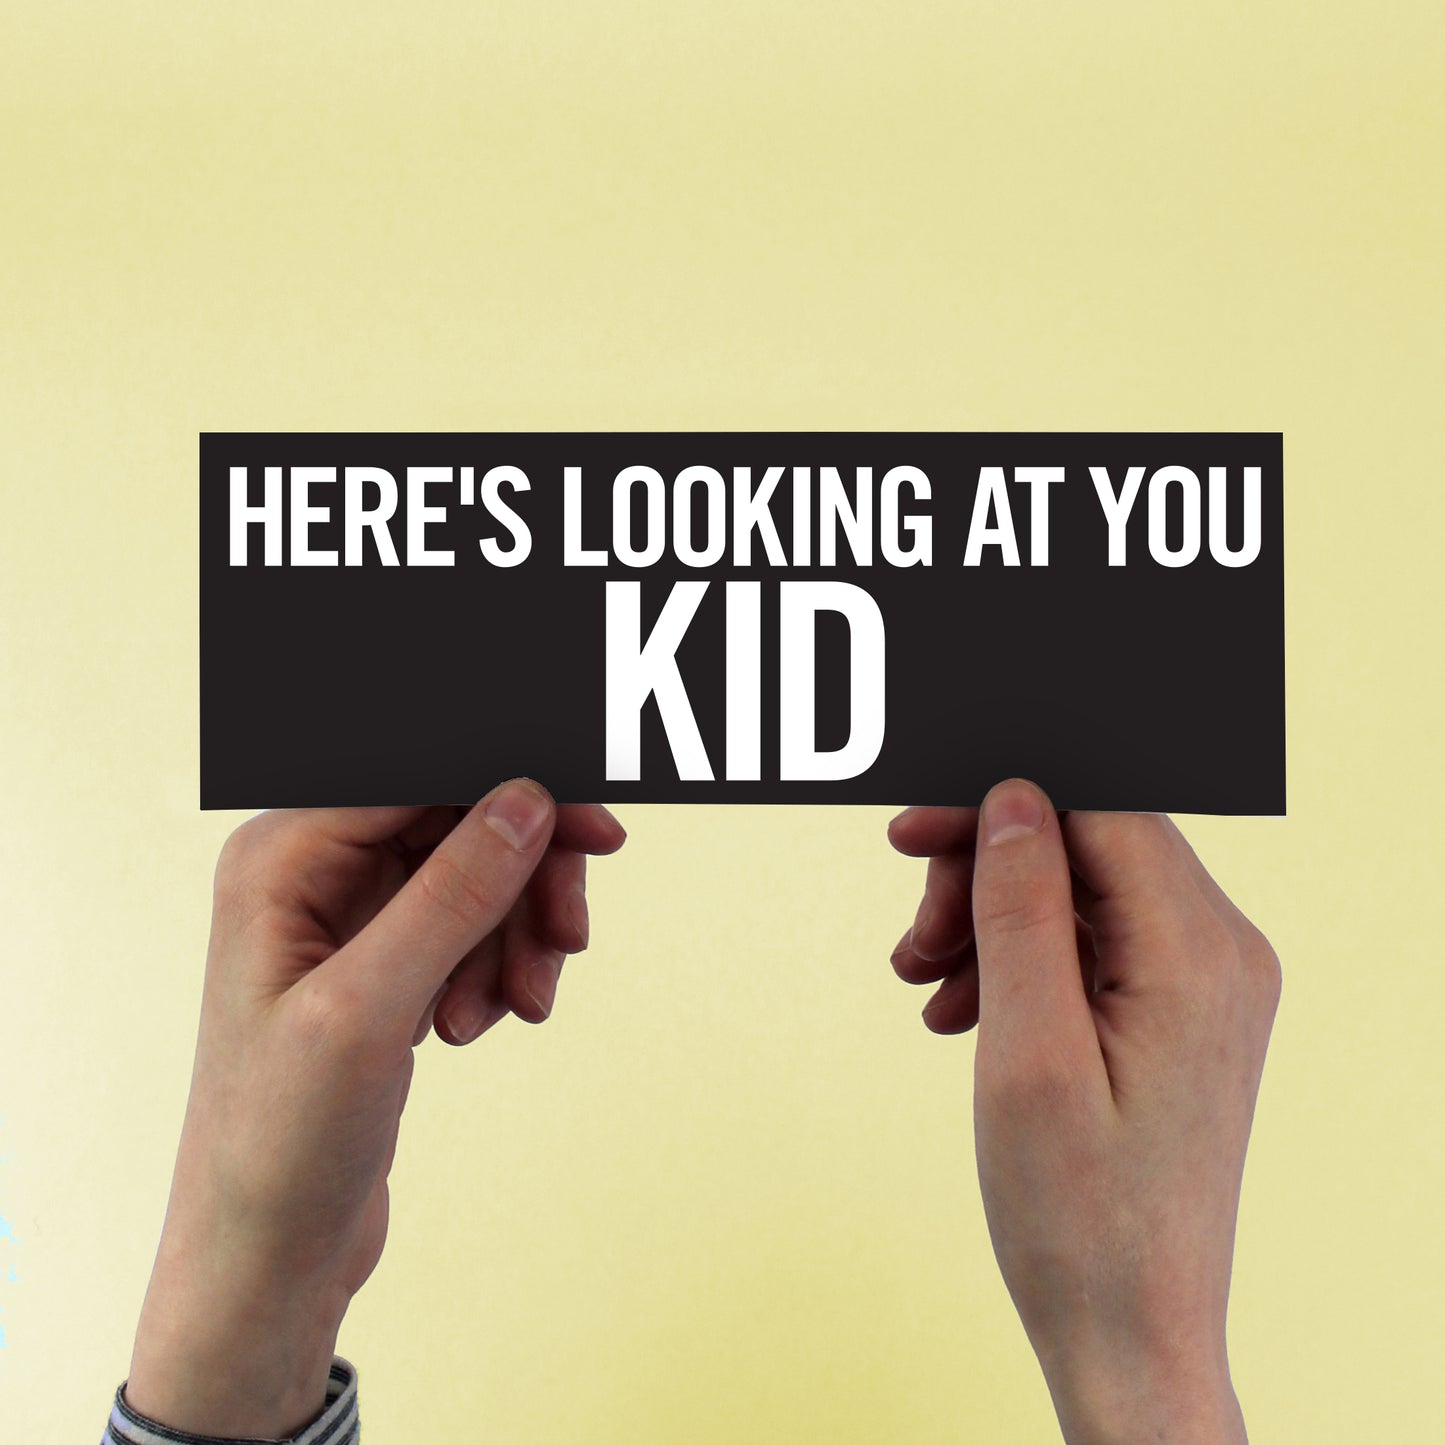 Casablanca "Here's looking at you, kid" Bumper Sticker